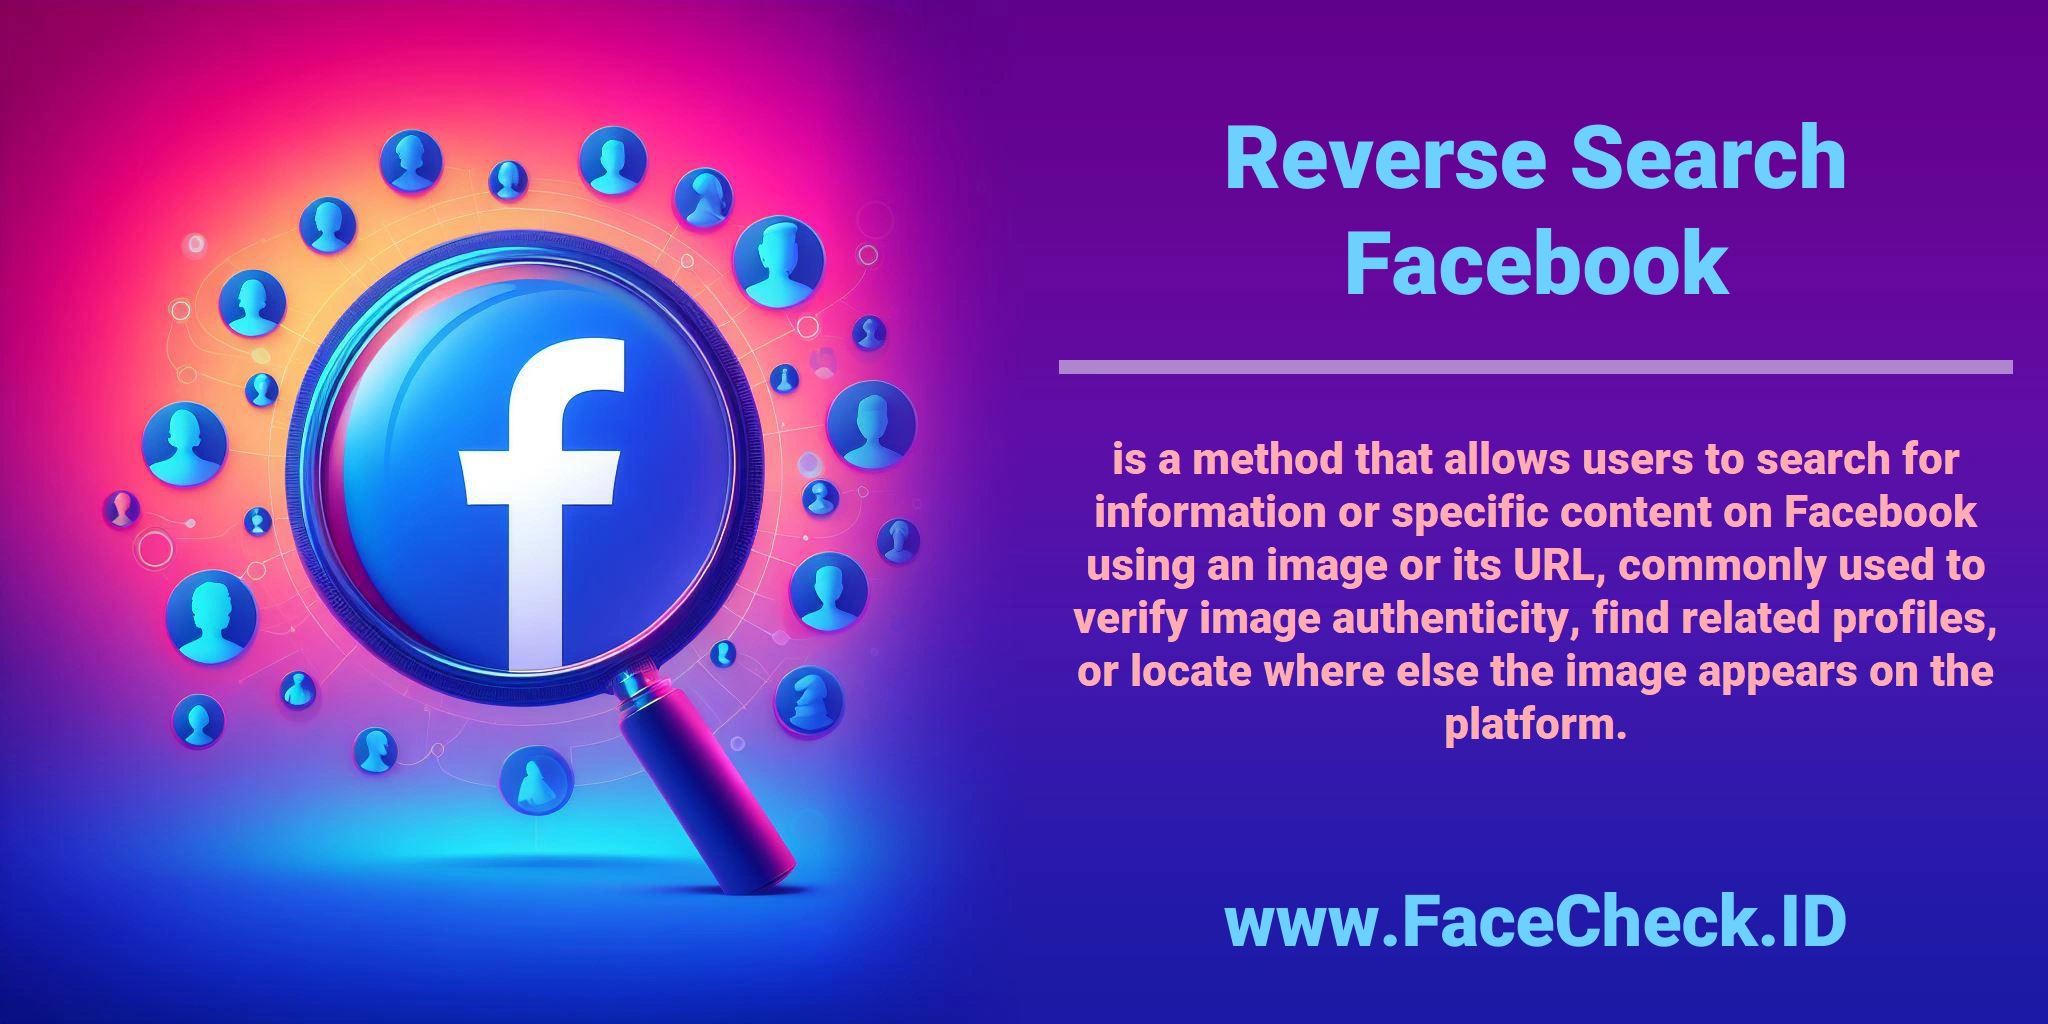 <b>Reverse Search Facebook</b> is a method that allows users to search for information or specific content on Facebook using an image or its URL, commonly used to verify image authenticity, find related profiles, or locate where else the image appears on the platform.